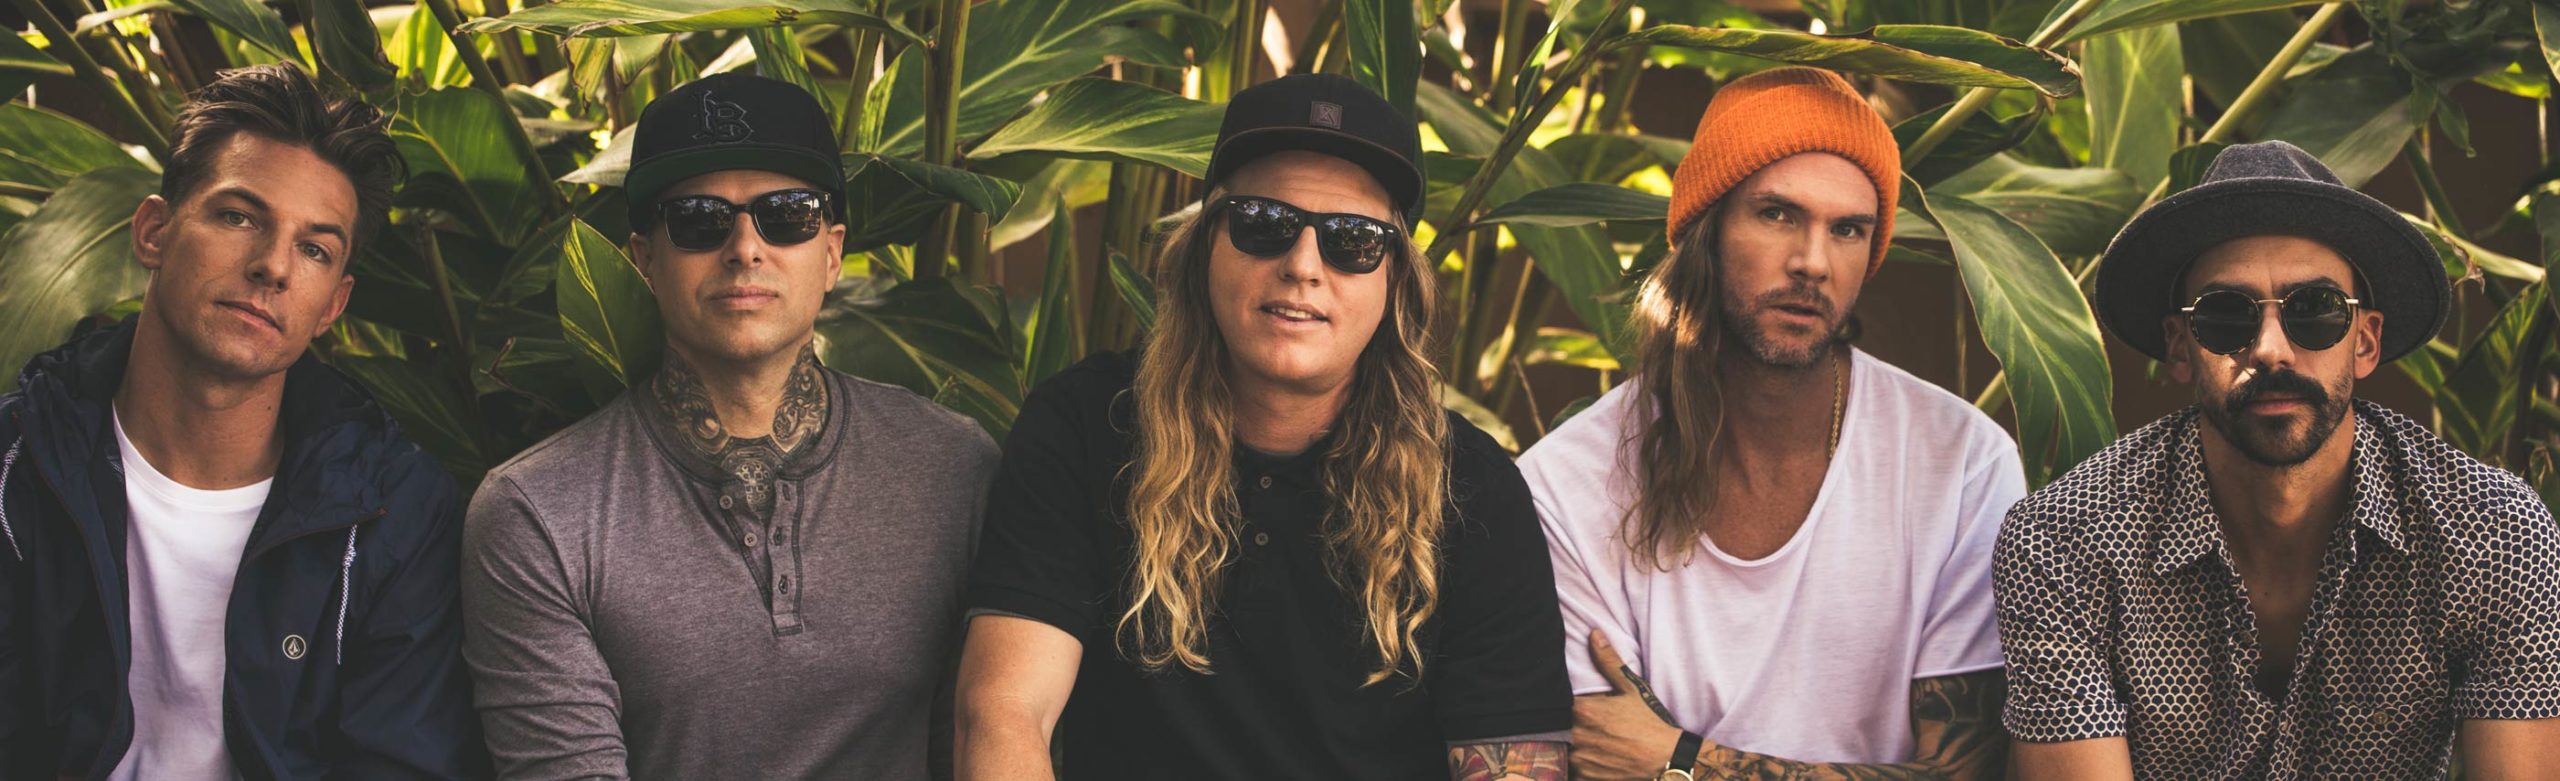 JUST ANNOUNCED: Dirty Heads, Iration, The Movement, and Pacific Dub to Play KettleHouse Amphitheater Image